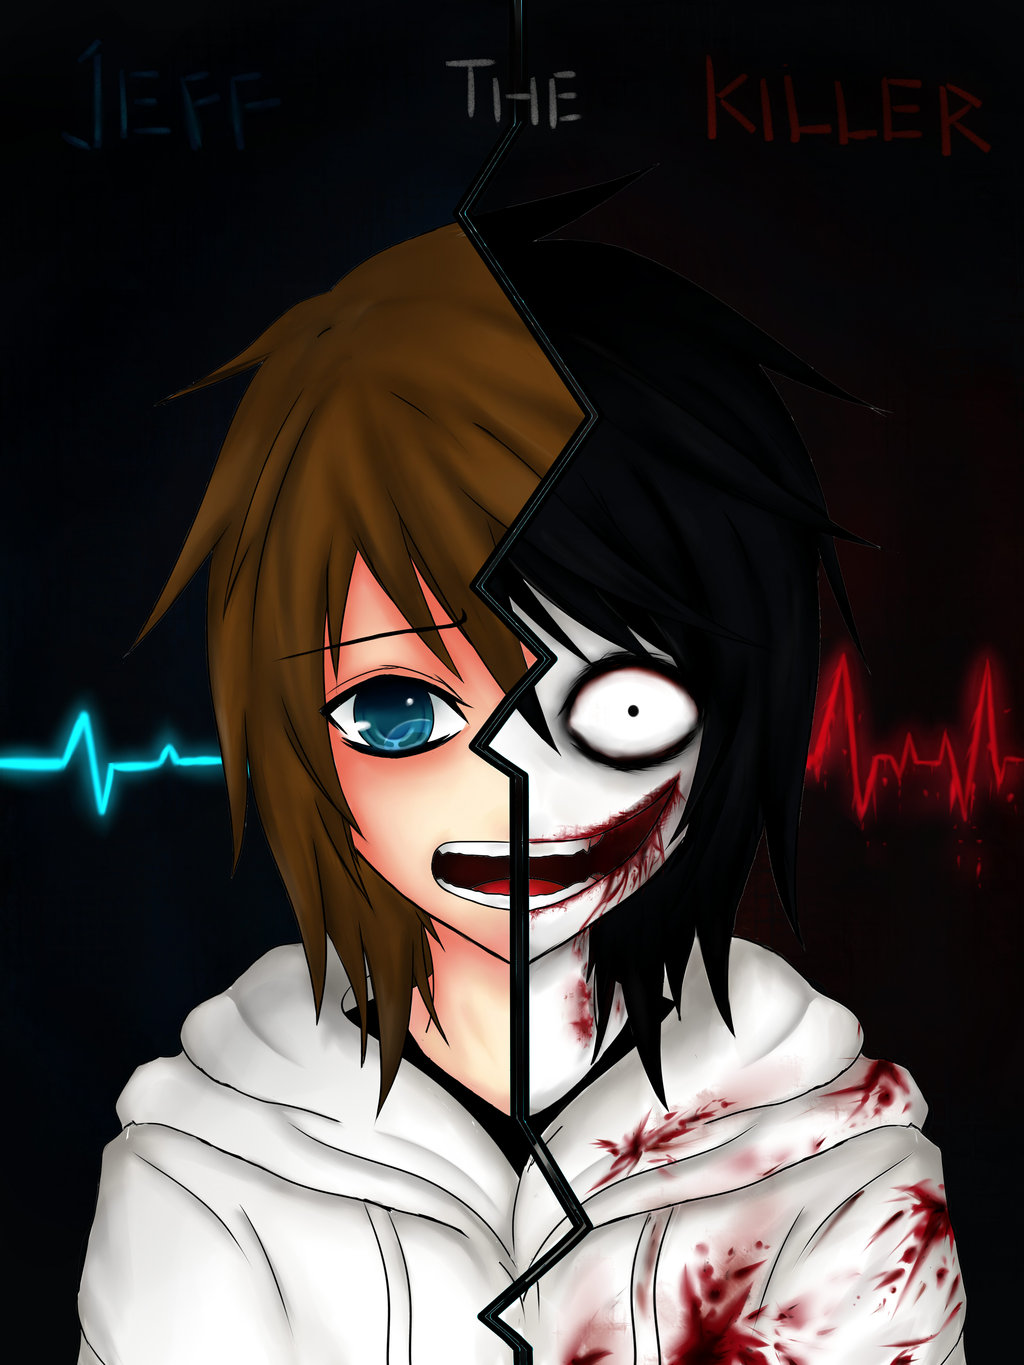 Anime Jeff The Killer HD Wallpaper And Pictures ImgHD Browse